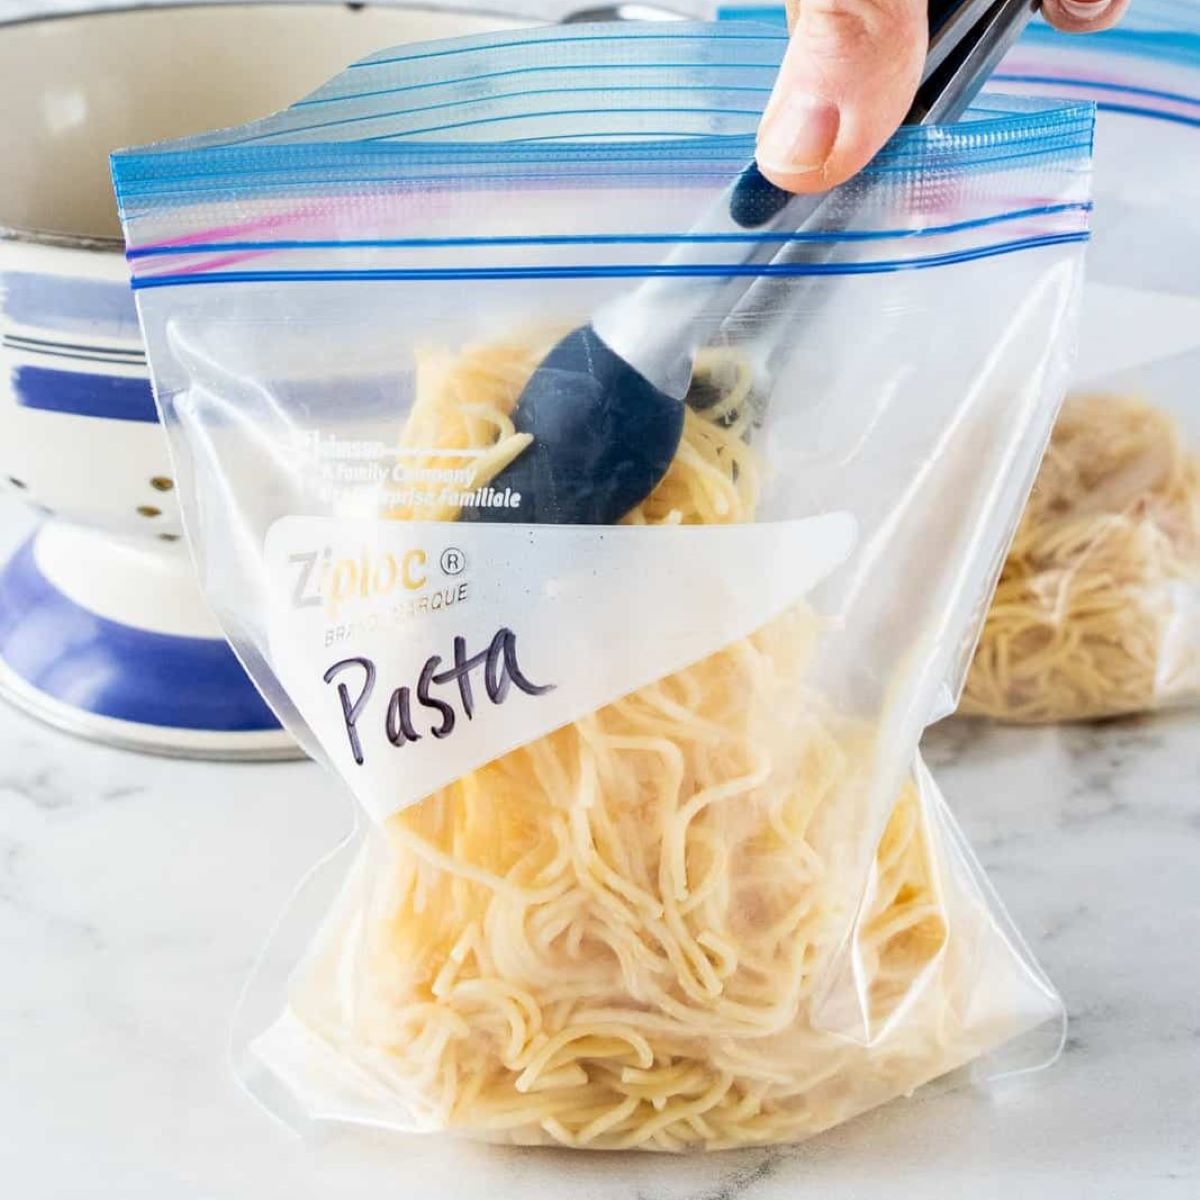 How To Store Cooked Pasta Without Sauce